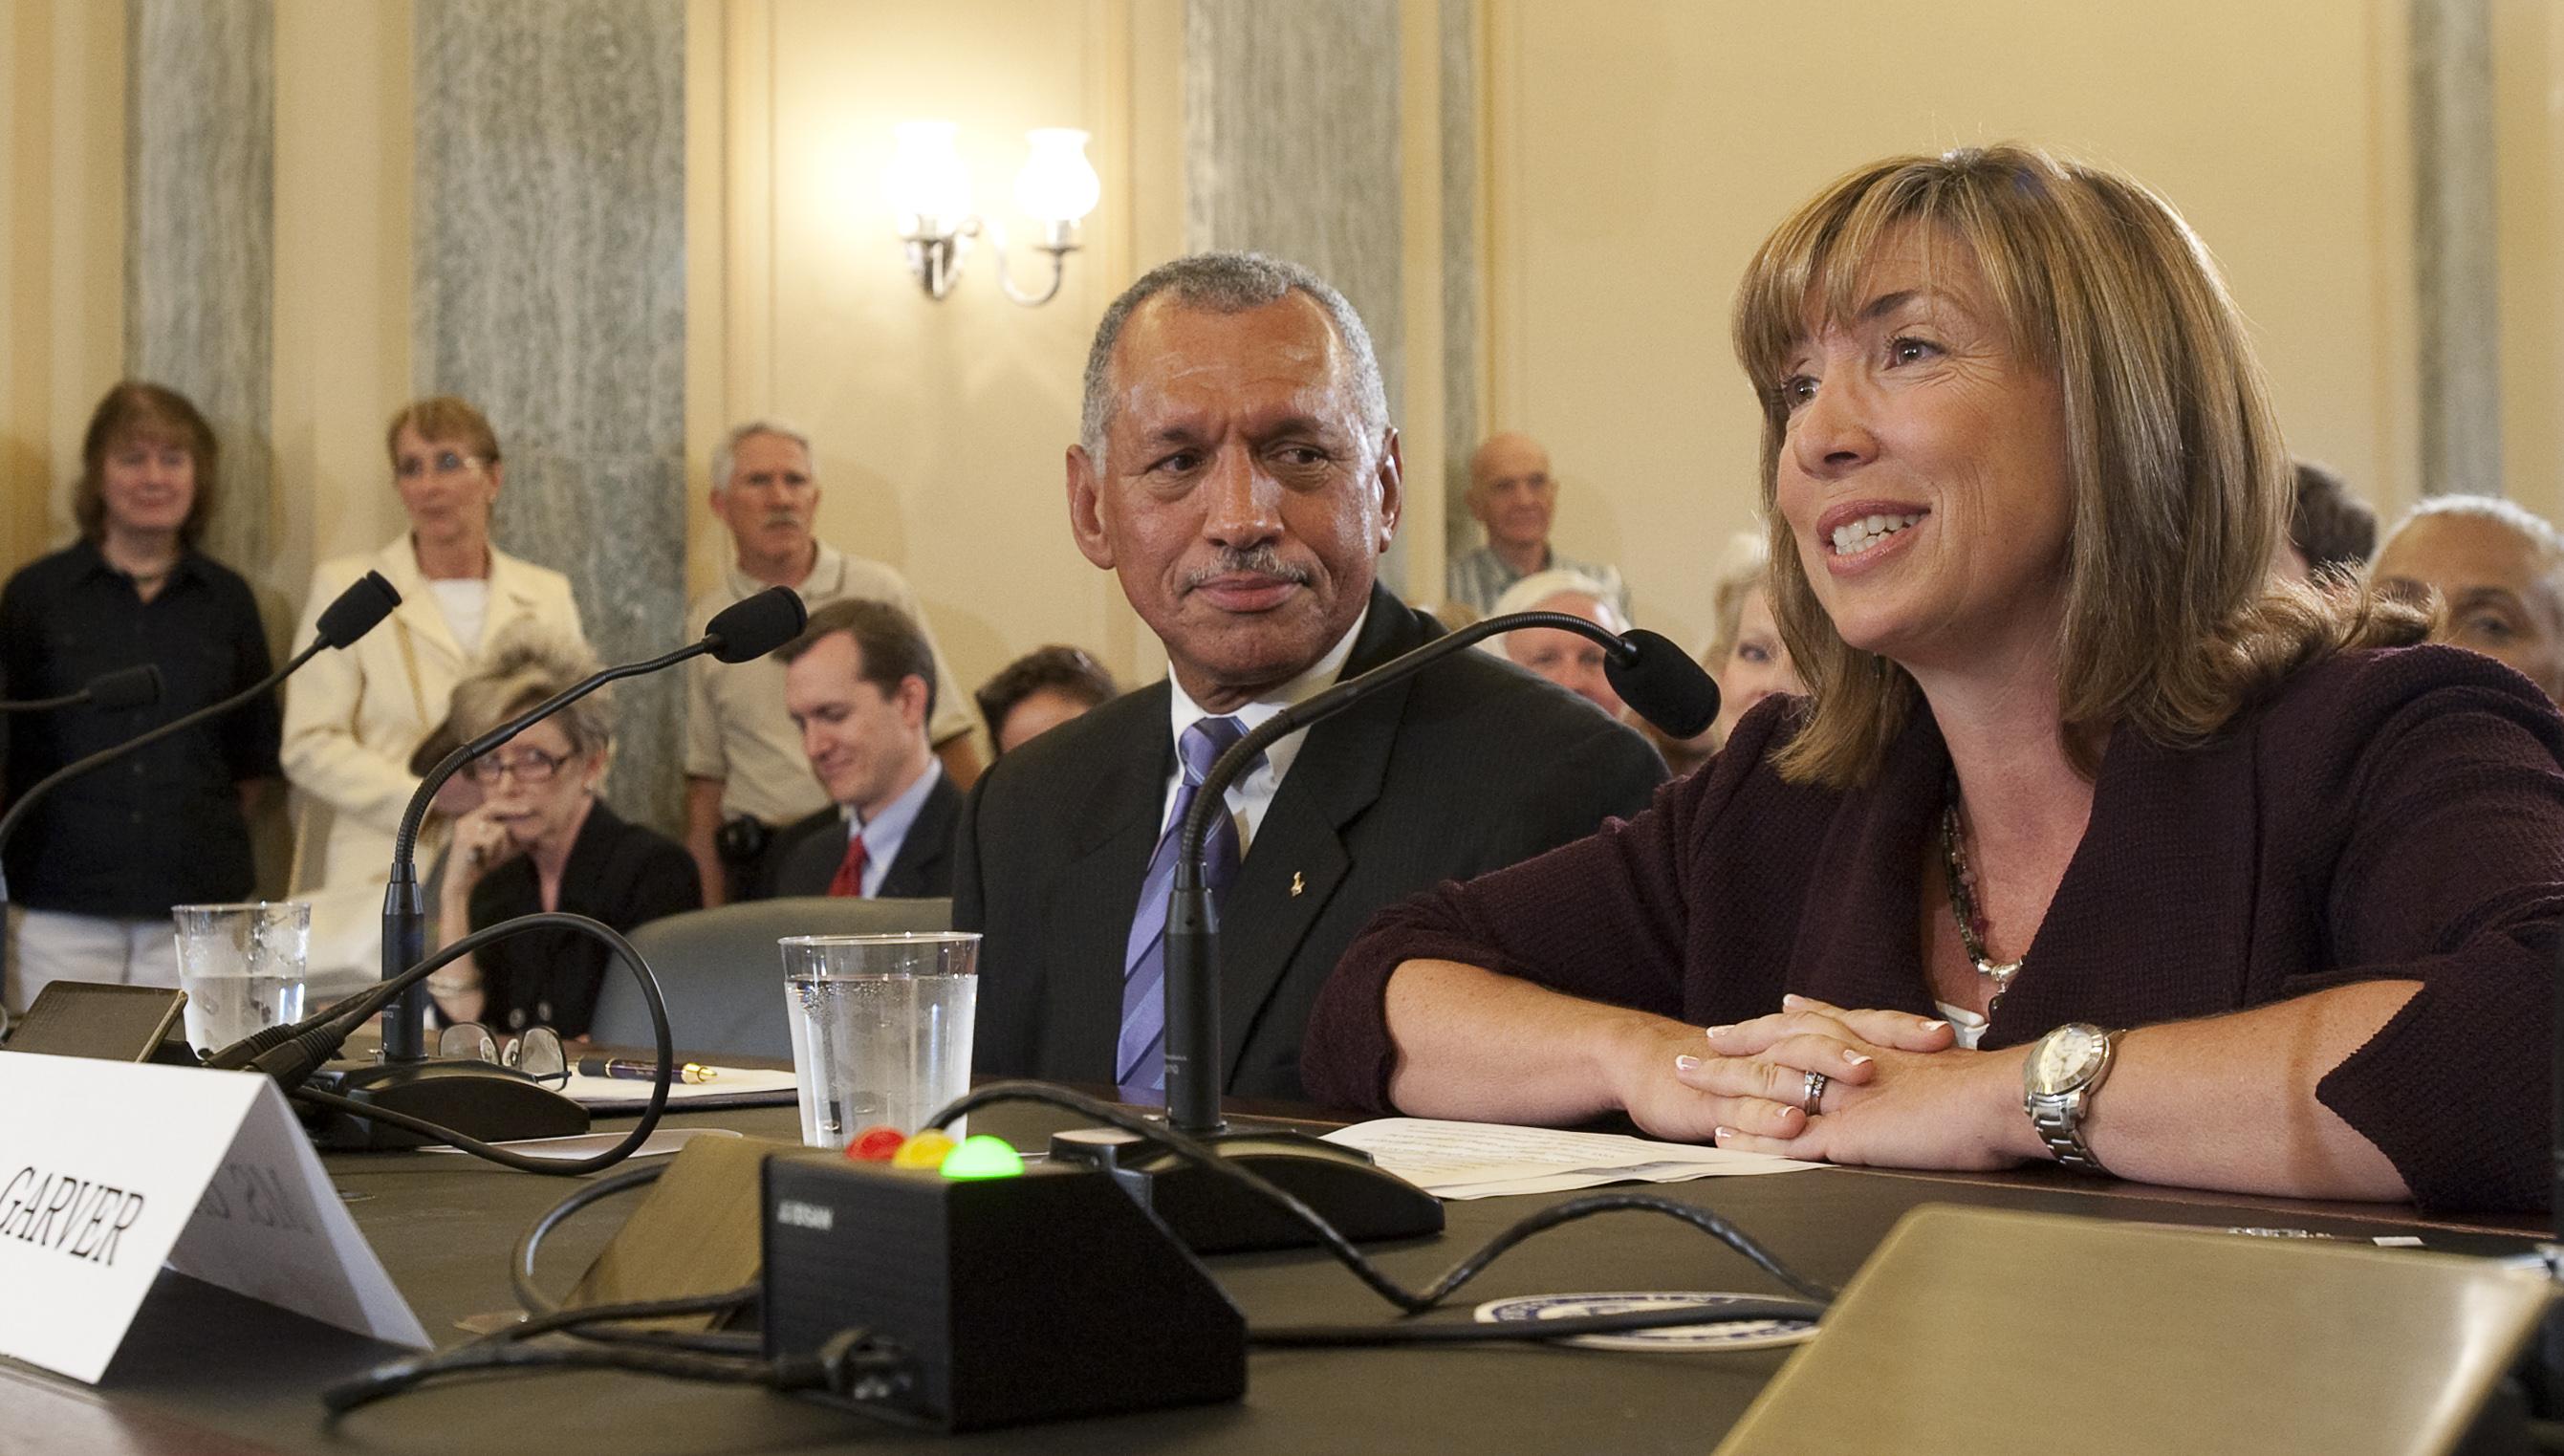 Lori Garver smiles while speaking to lawmakers during Senate confirmation hearings in 2009.